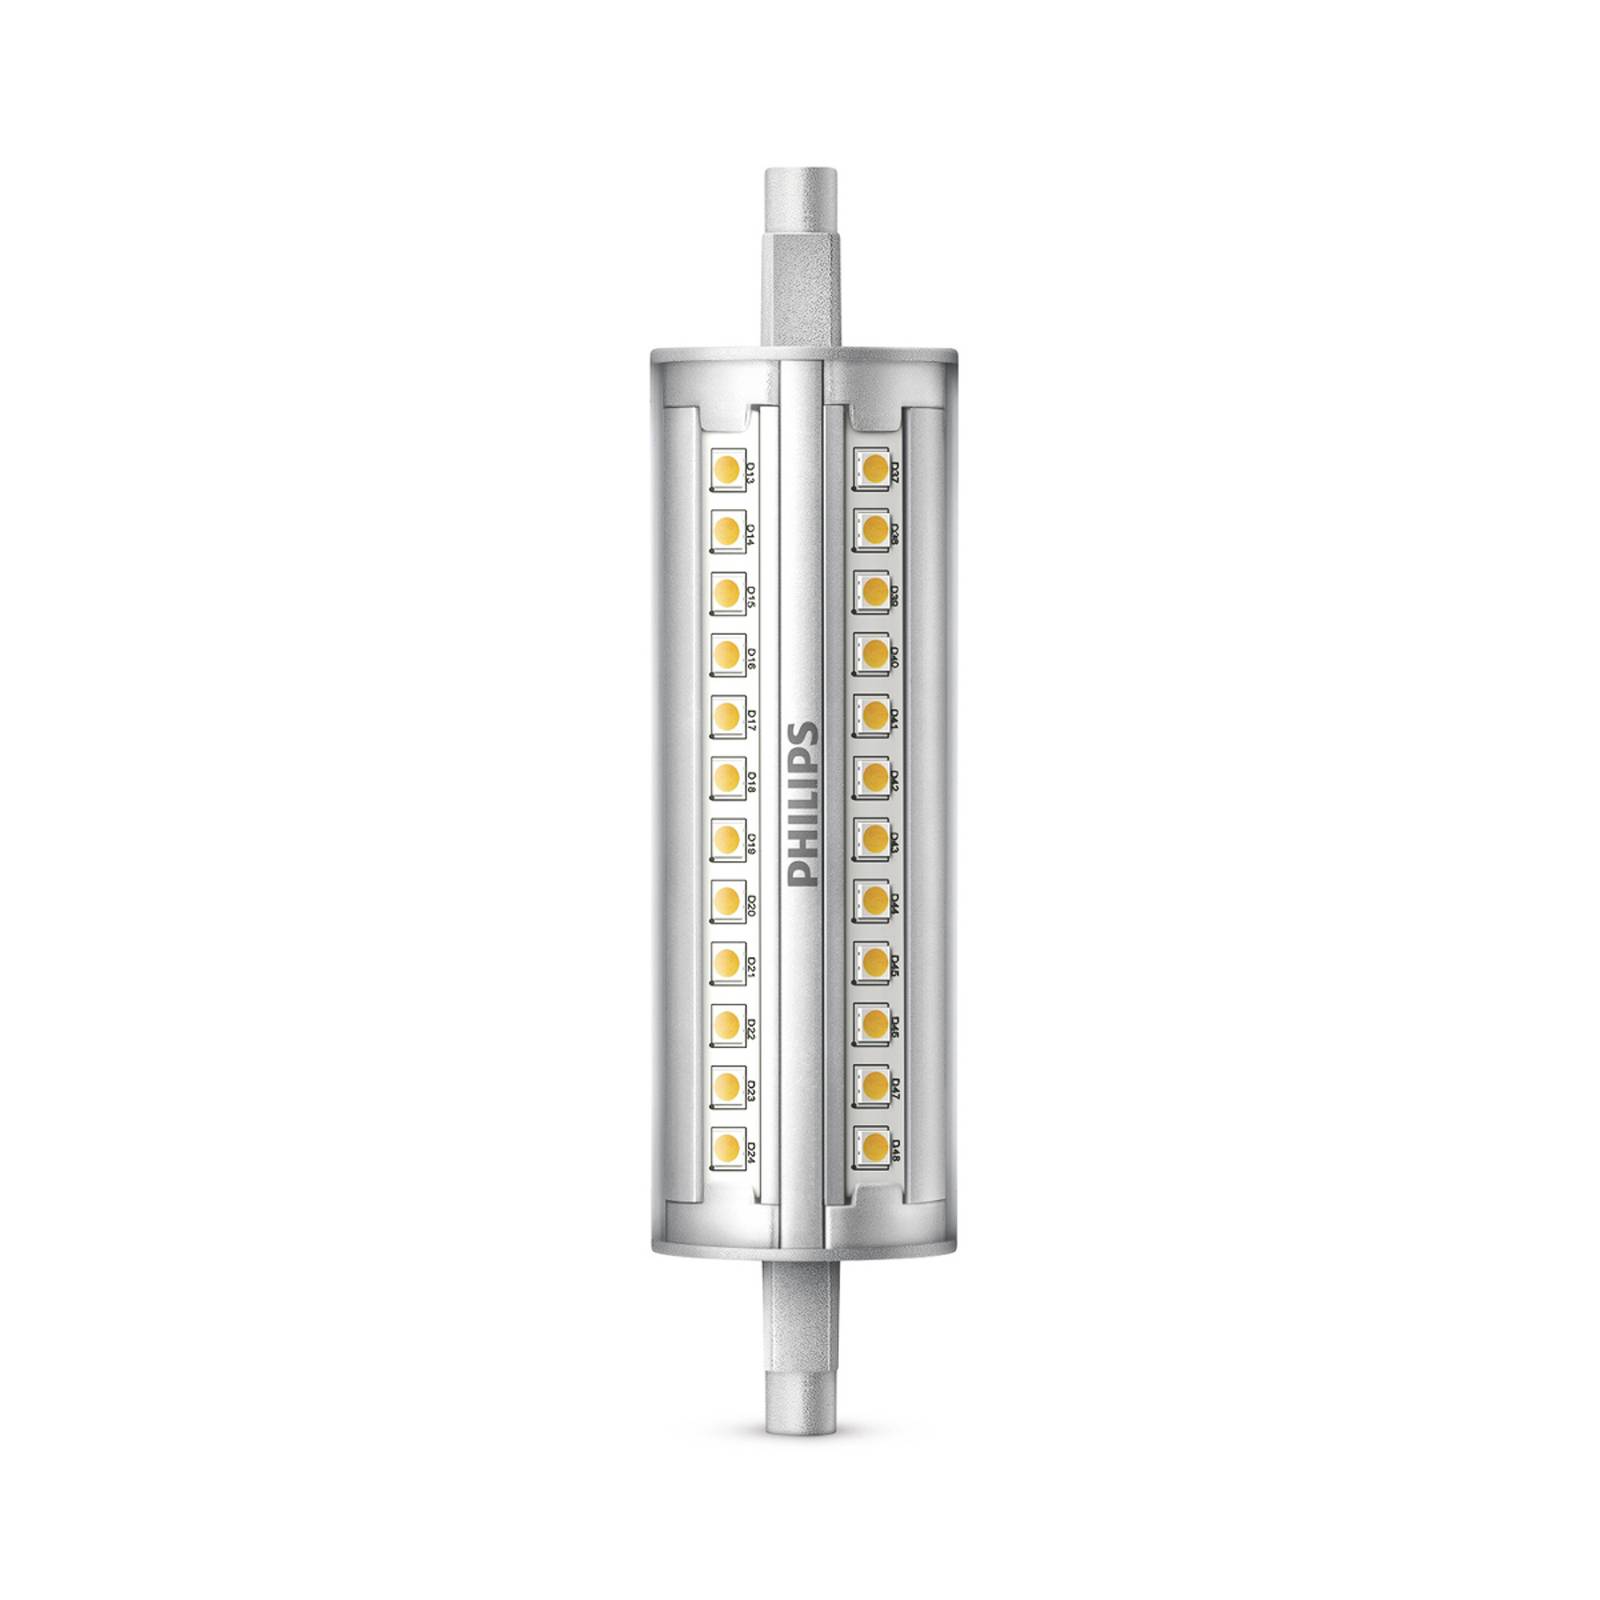 Photos - Chandelier / Lamp Philips R7s 14 W 830 LED linear lamp, dimmable 